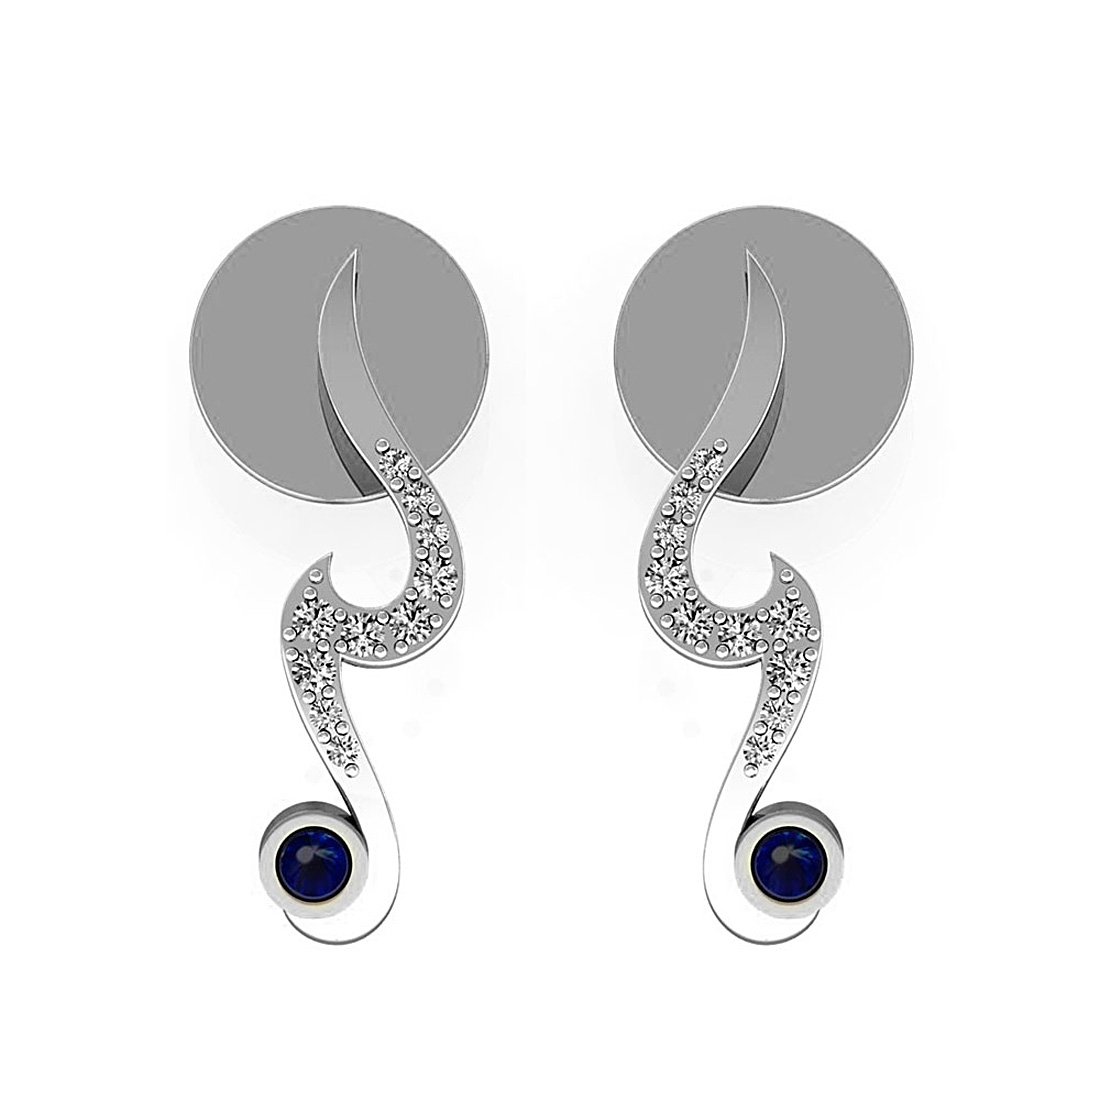 18k solid white gold diamond stud earrings with blue sapphire